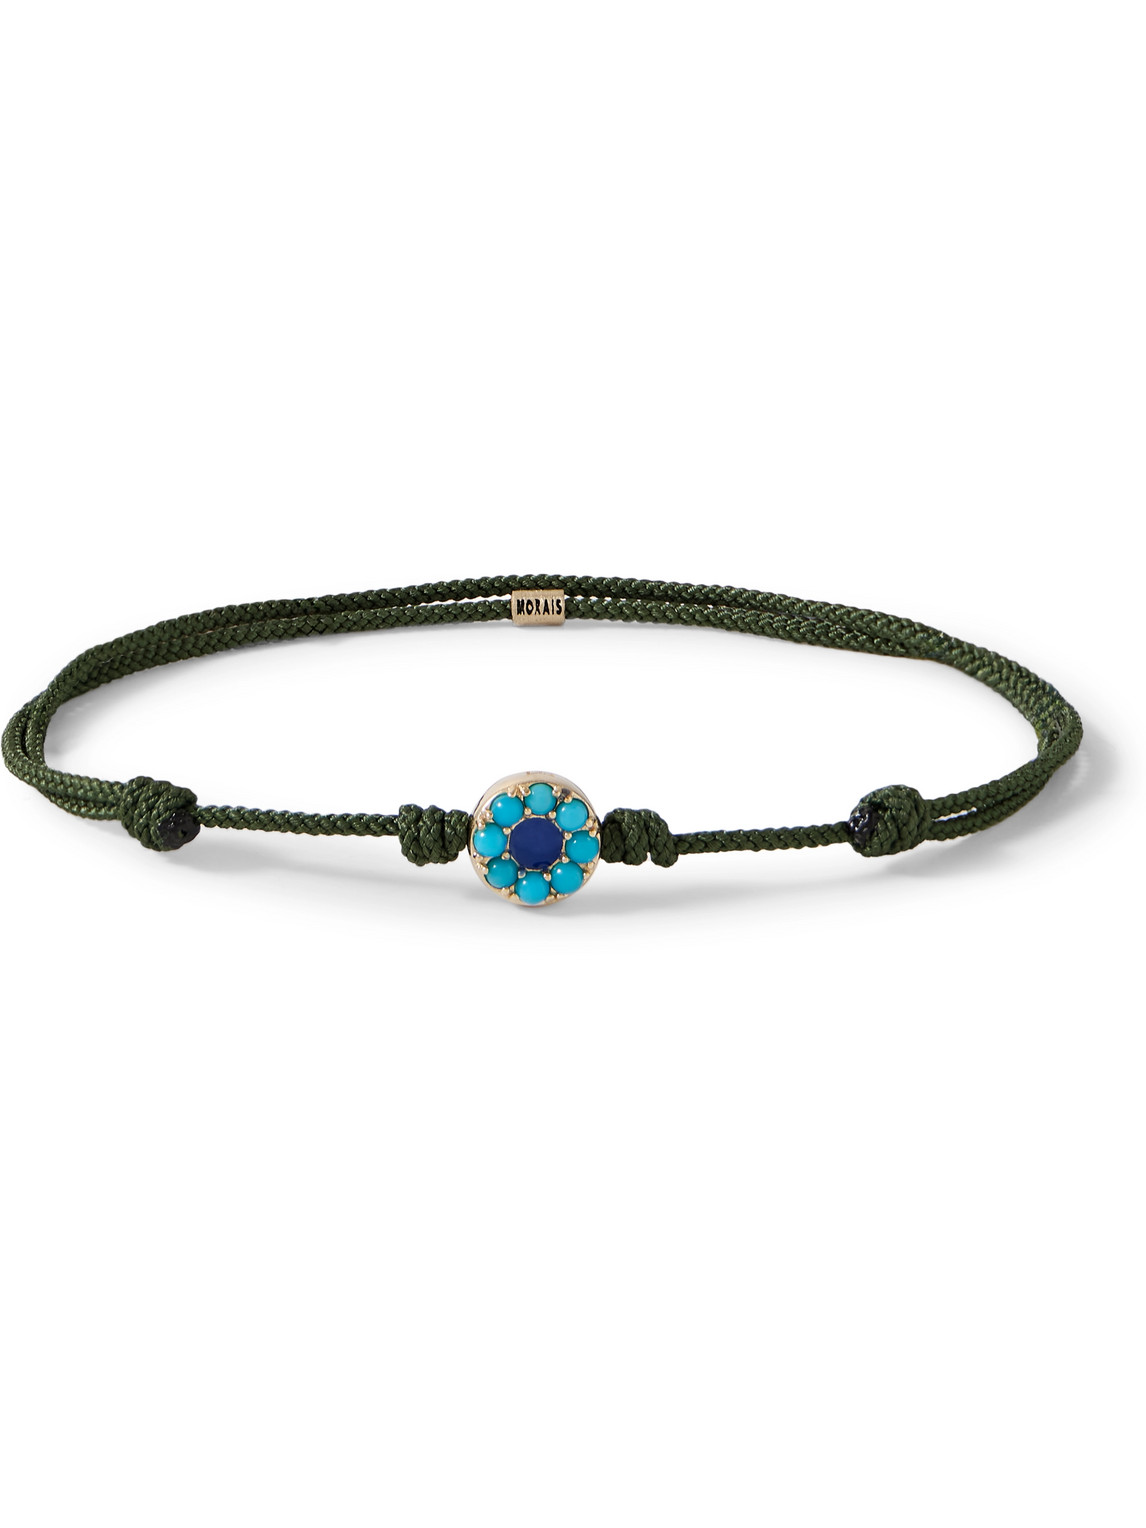 Luis Morais Gold, Turquoise, Enamel And Cord Bracelet In Green